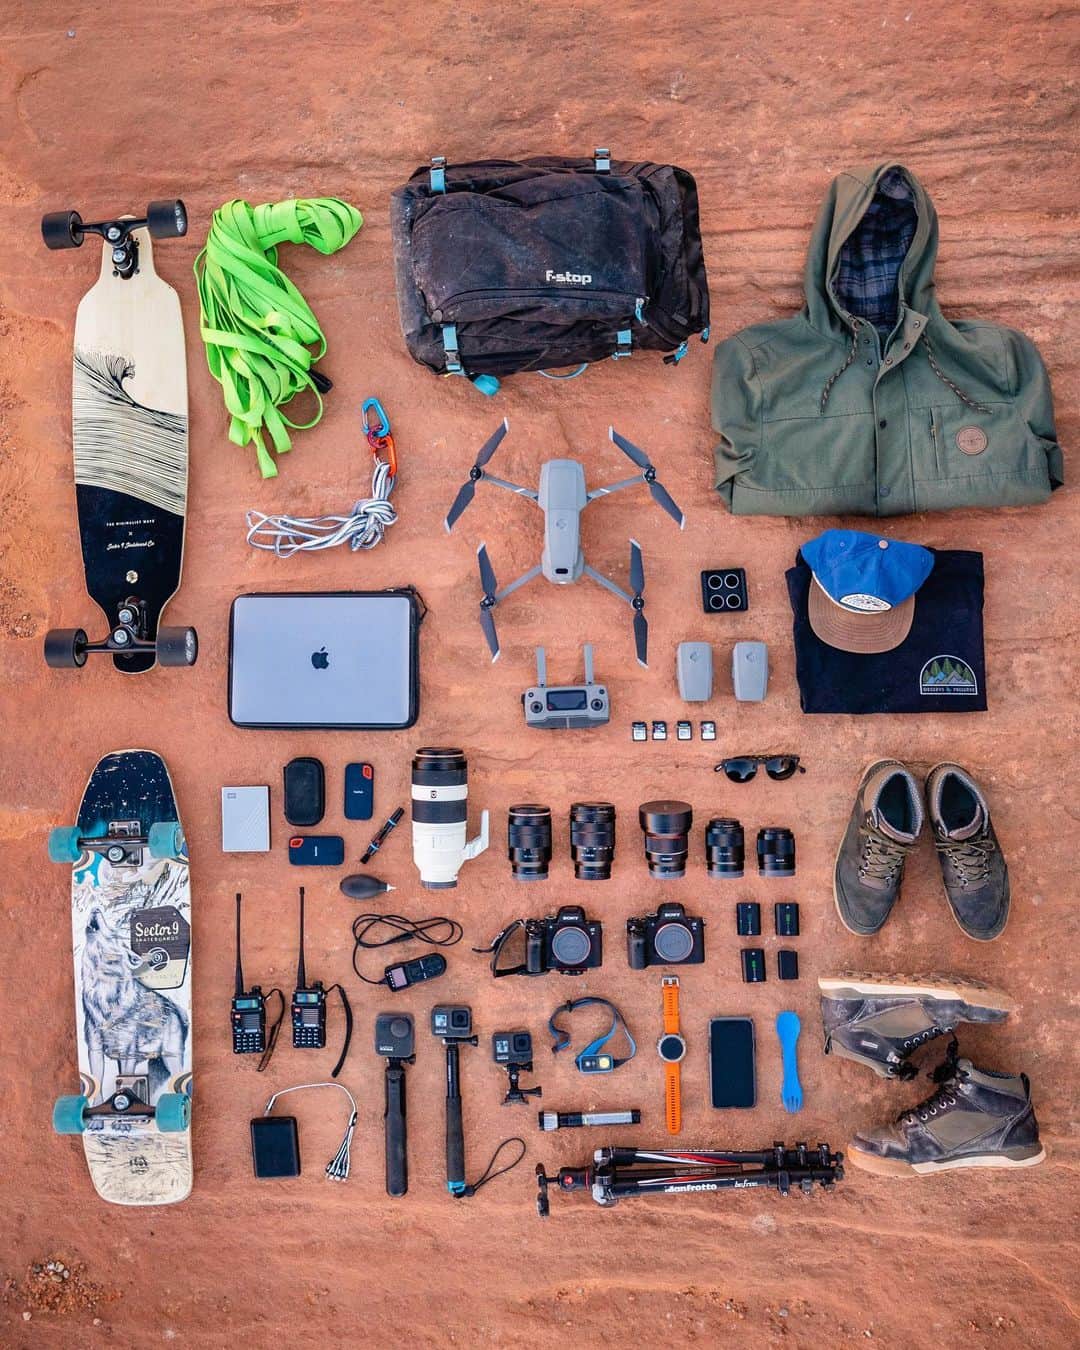 Travis Burkeのインスタグラム：「Tools, Toys & Tech.  I frequently receive messages asking what gear I use or recommend, and sadly, I can’t possibly respond to them all. I wanted to use this as an opportunity to showcase a lot of my everyday gear and try to answer any questions you might have.  Below is a list of most of the items in the photo.  I’ll do my best to answer every question in the comments and I hope others can read and learn from the questions and answers below as well! Thank you all for the continued support!  CAMERAS- Sony A7RIII + Sony A7SII.  LENSES- 14mm f/2.8, 28mm f/2, 55mm f/1.8, 16-35mm f/4, 24-70mm f/4, 100-400mm f/4.5-5.6.  GOPROS- @gopro Hero8 x2, and MAX 360° camera.  TRIPOD- Manfrotto Befree CF.  DRONE- DJI Mavic Pro 2 Zoom.  LAPTOP- 2018 Mac Book Pro 15”. HARD DRIVES- Sandisk 1 TB SSD x2, WD 4 TB.  FLASHLIGHT- @GoalZero Switch 10.  HEADLAMP- Black Diamond Ion.  SHOES- @forsakeco Clyde II’s & Phil Mid’s.  RADIOS- BaoFeng BF-F8HP.  CLOTHES- @HippyTree Mid land Jacket + any hat and tee combo.  SKATEBOARDS- @Sector9 Howl Ninety Five + any carving board.  SLACKLINE- @balancecommunity 33m Feather webbing.  BACKPACK- F-Stop Kashmir UL.  SPORK- Any reusable utensil to help reduce plastic waste :). #whatsinthebag #gear #knolling #geardump #photographygear」